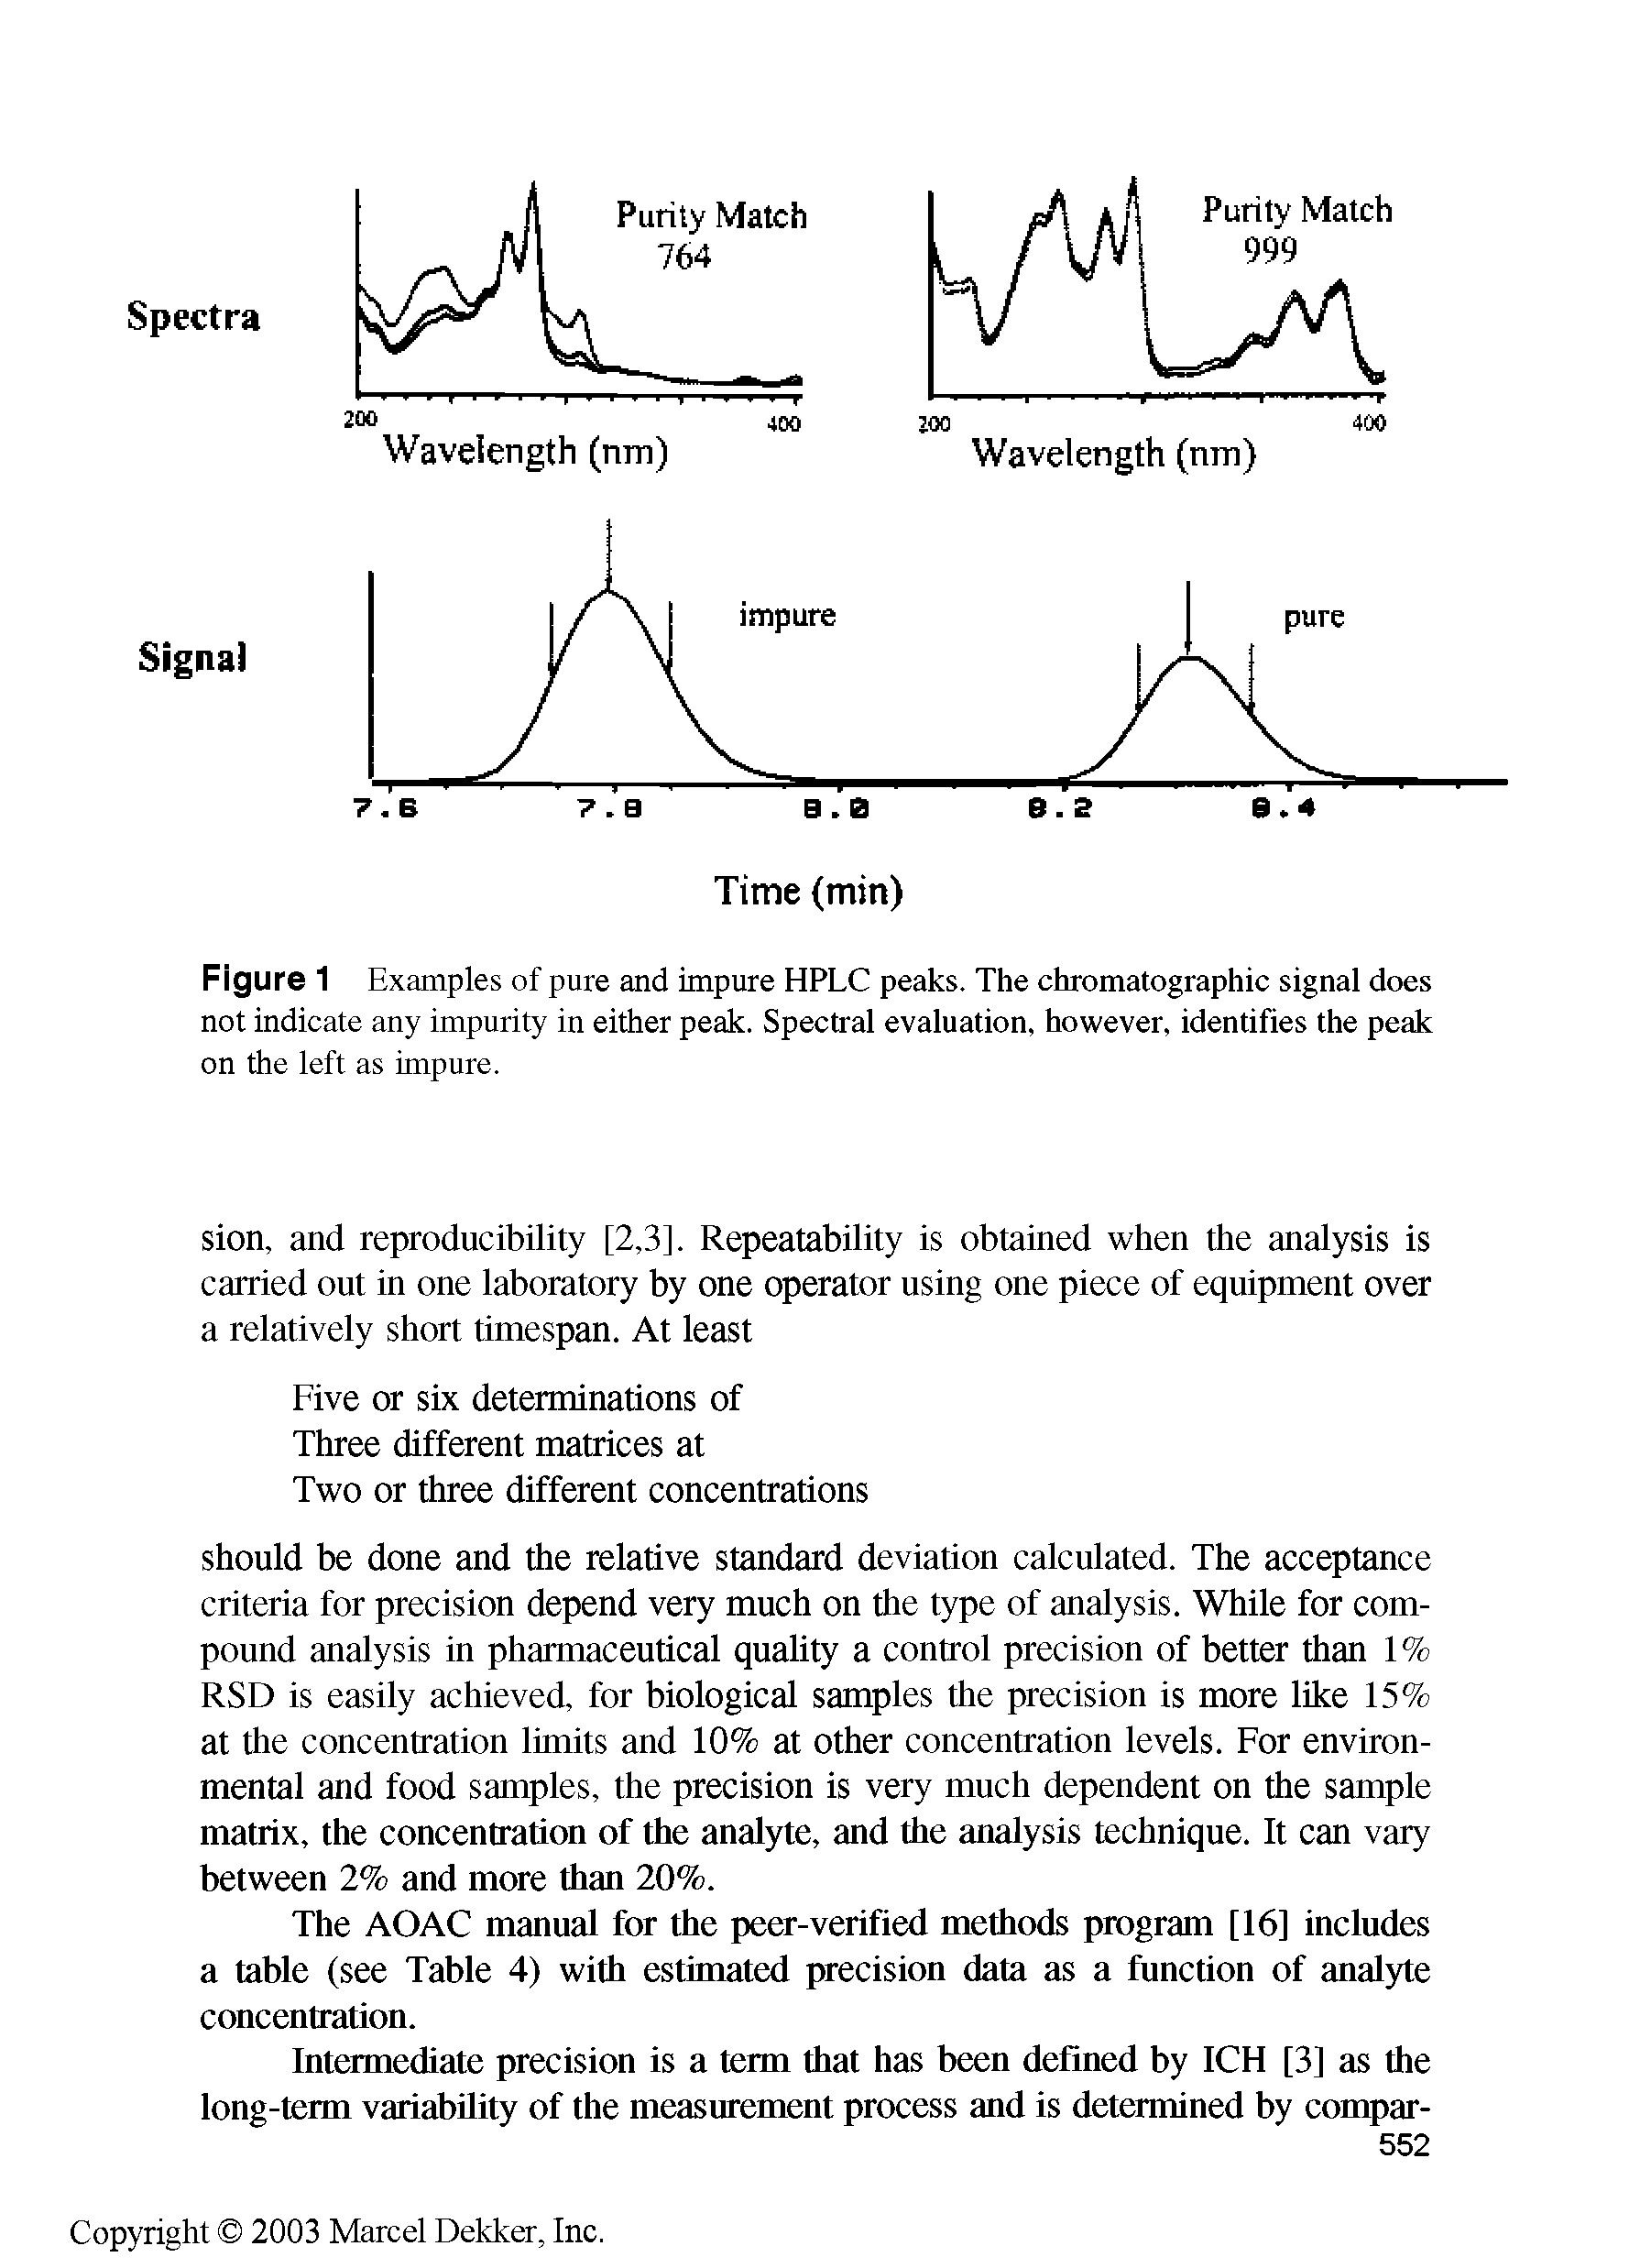 Figure 1 Examples of pure and impure HPLC peaks. The chromatographic signal does not indicate any impurity in either peak. Spectral evaluation, however, identifies the peak...